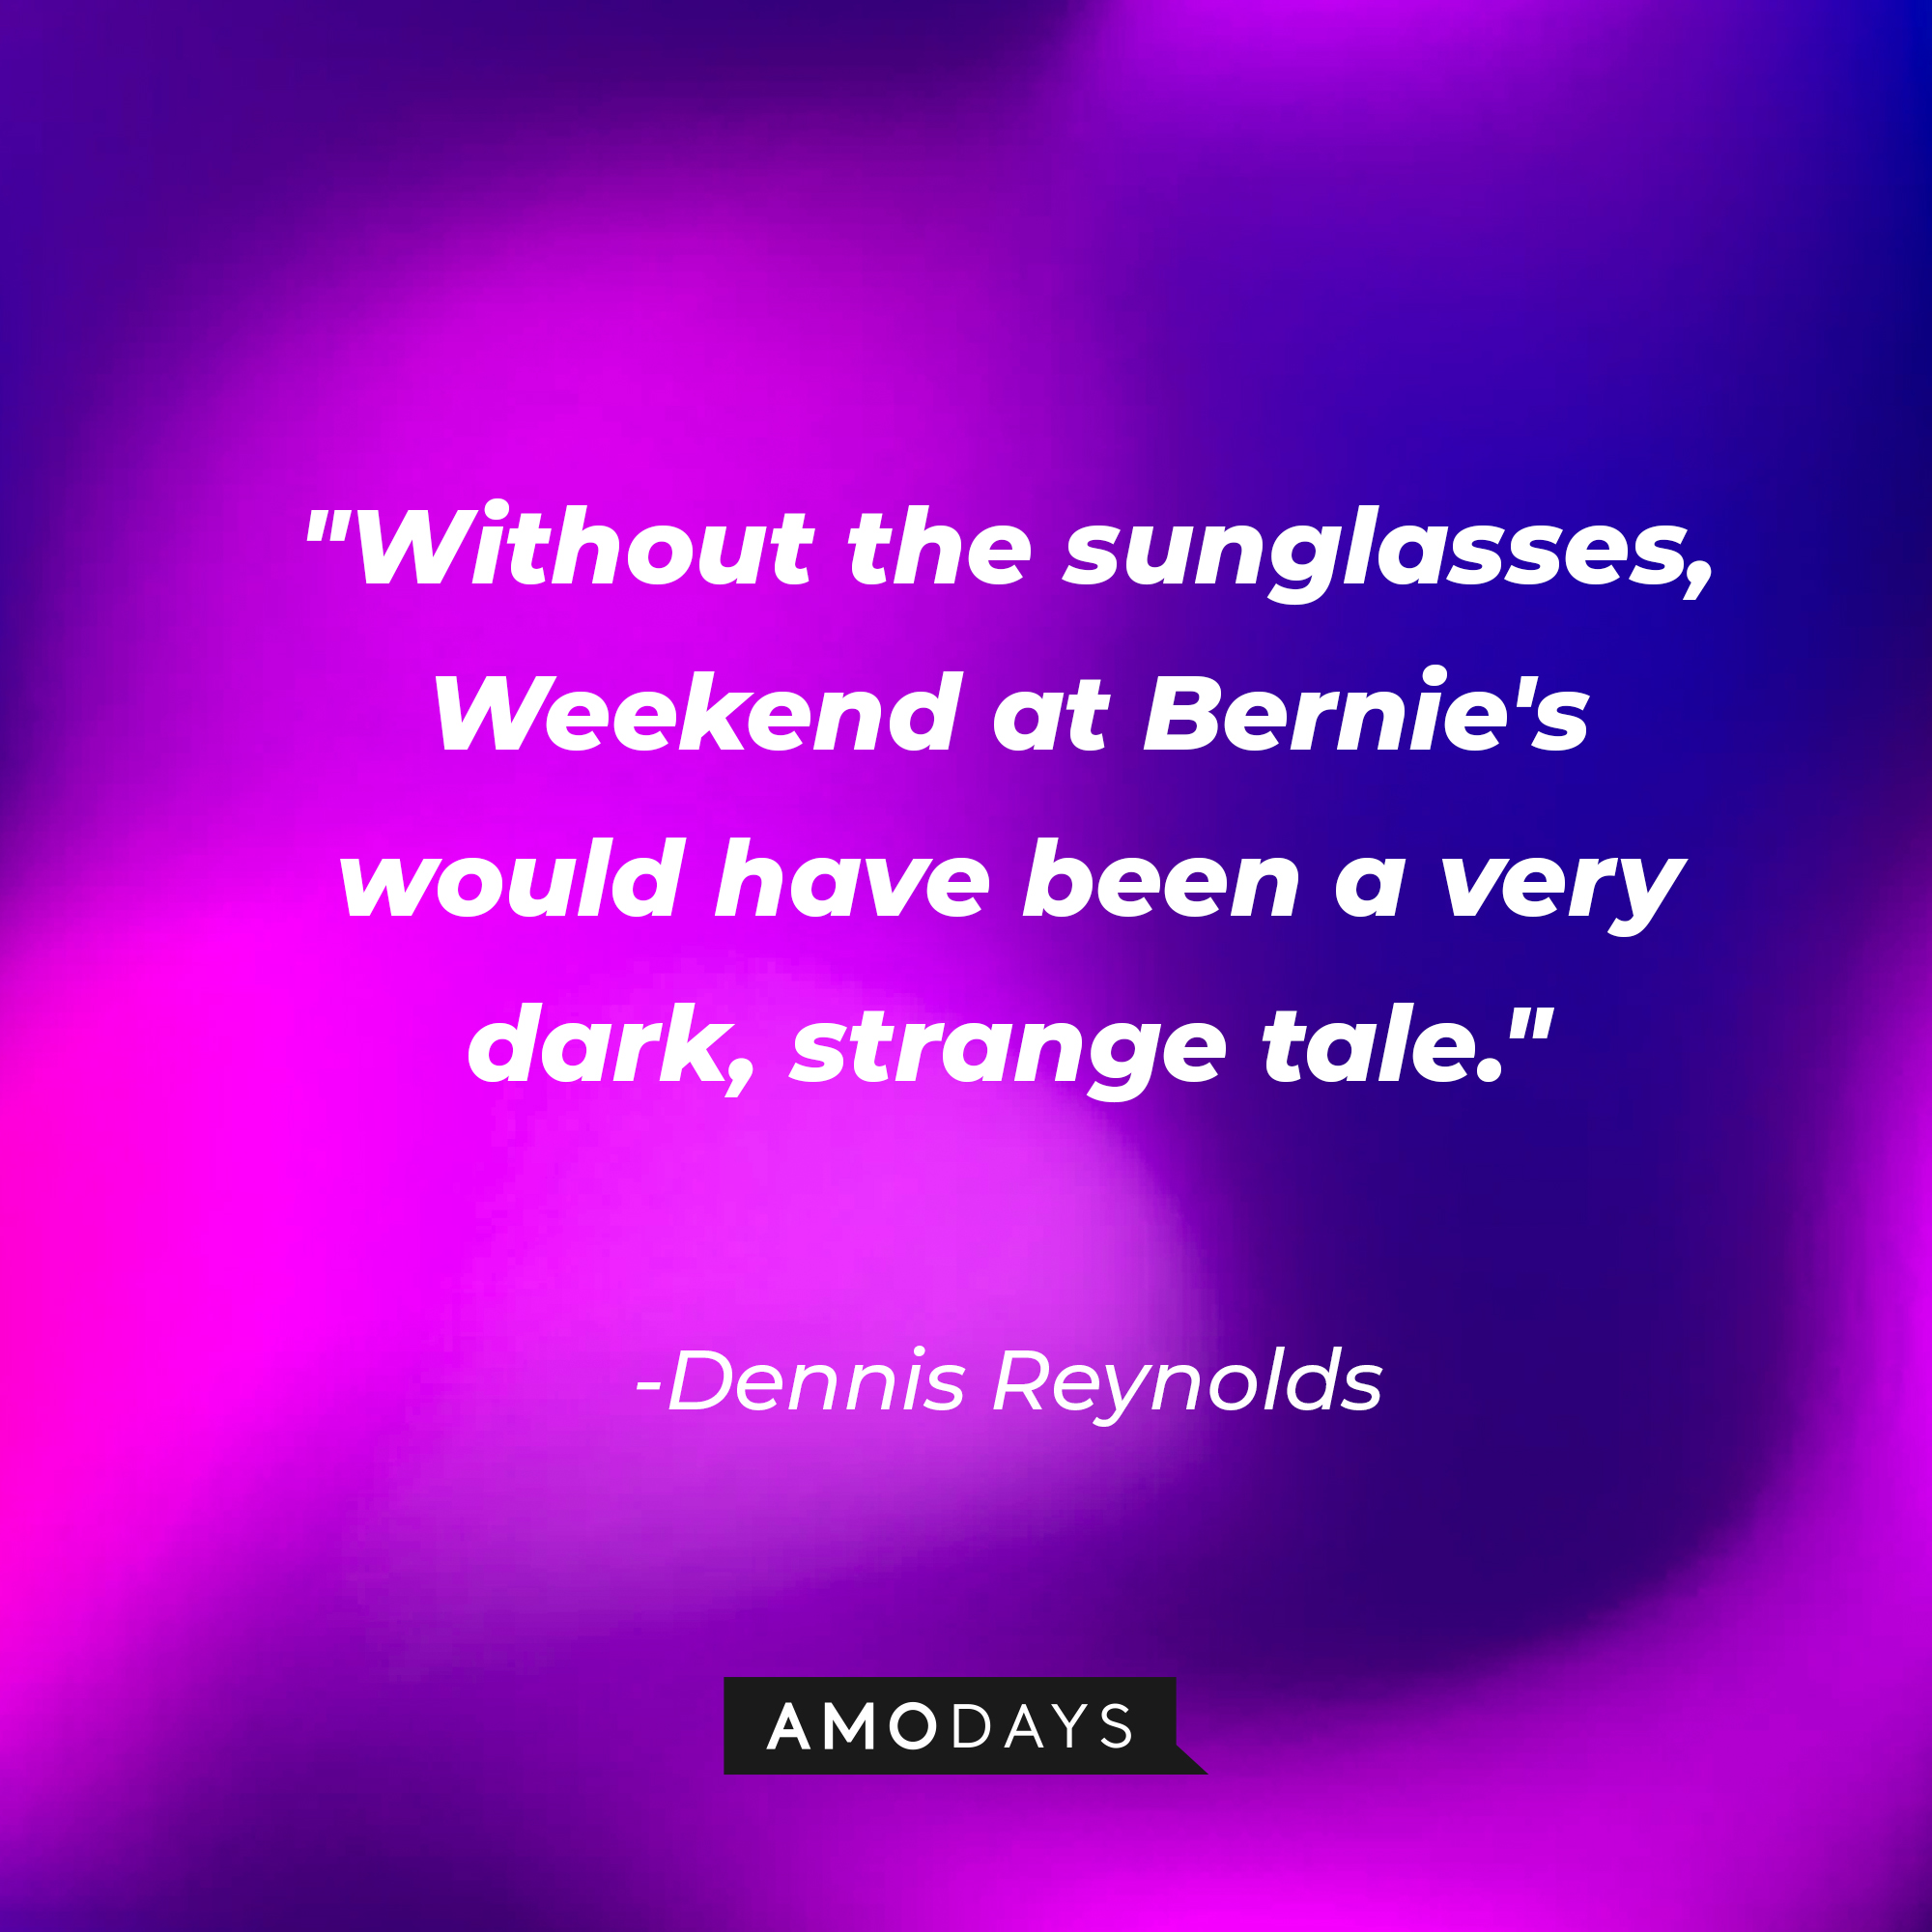 Dennis Reynolds’ quote:  “Without the sunglasses, Weekend at Bernie's would have been a very dark, strange tale.” | Source: AmoDays